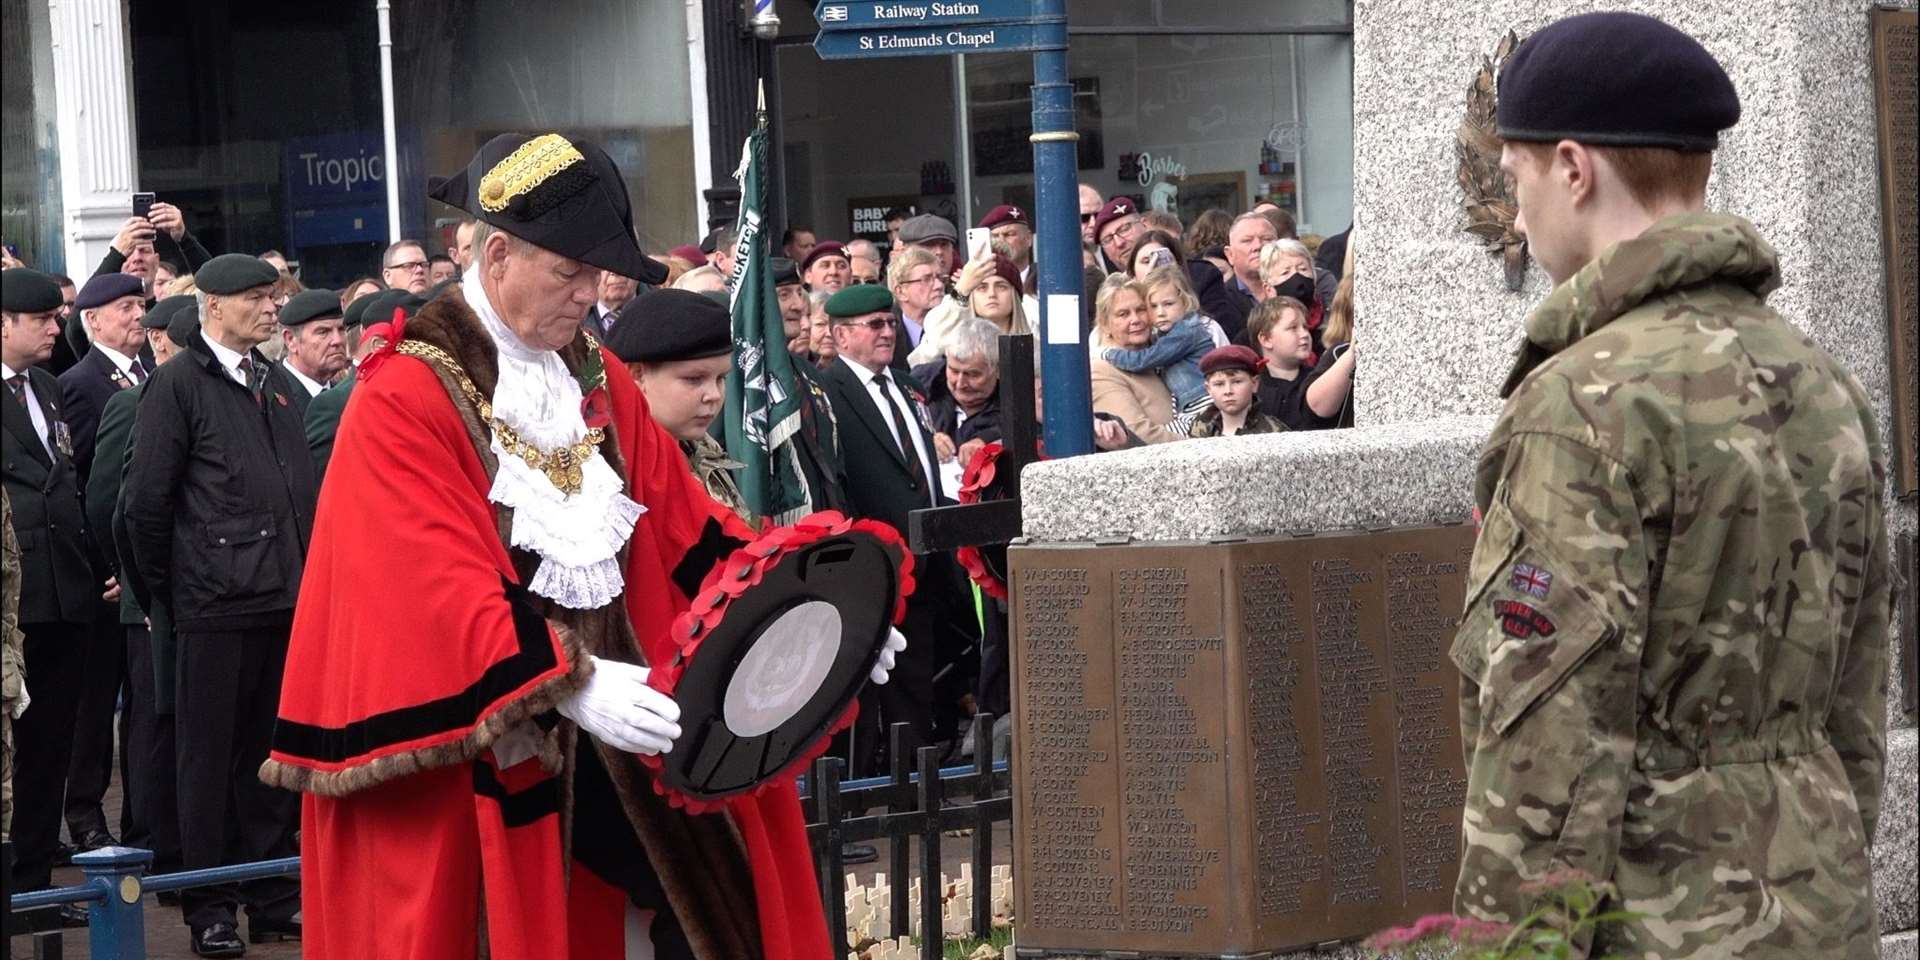 Mayor Gordon Cowan laying a wreath, Remembrance Sunday 2021. Picture: Annual Dover Film festival